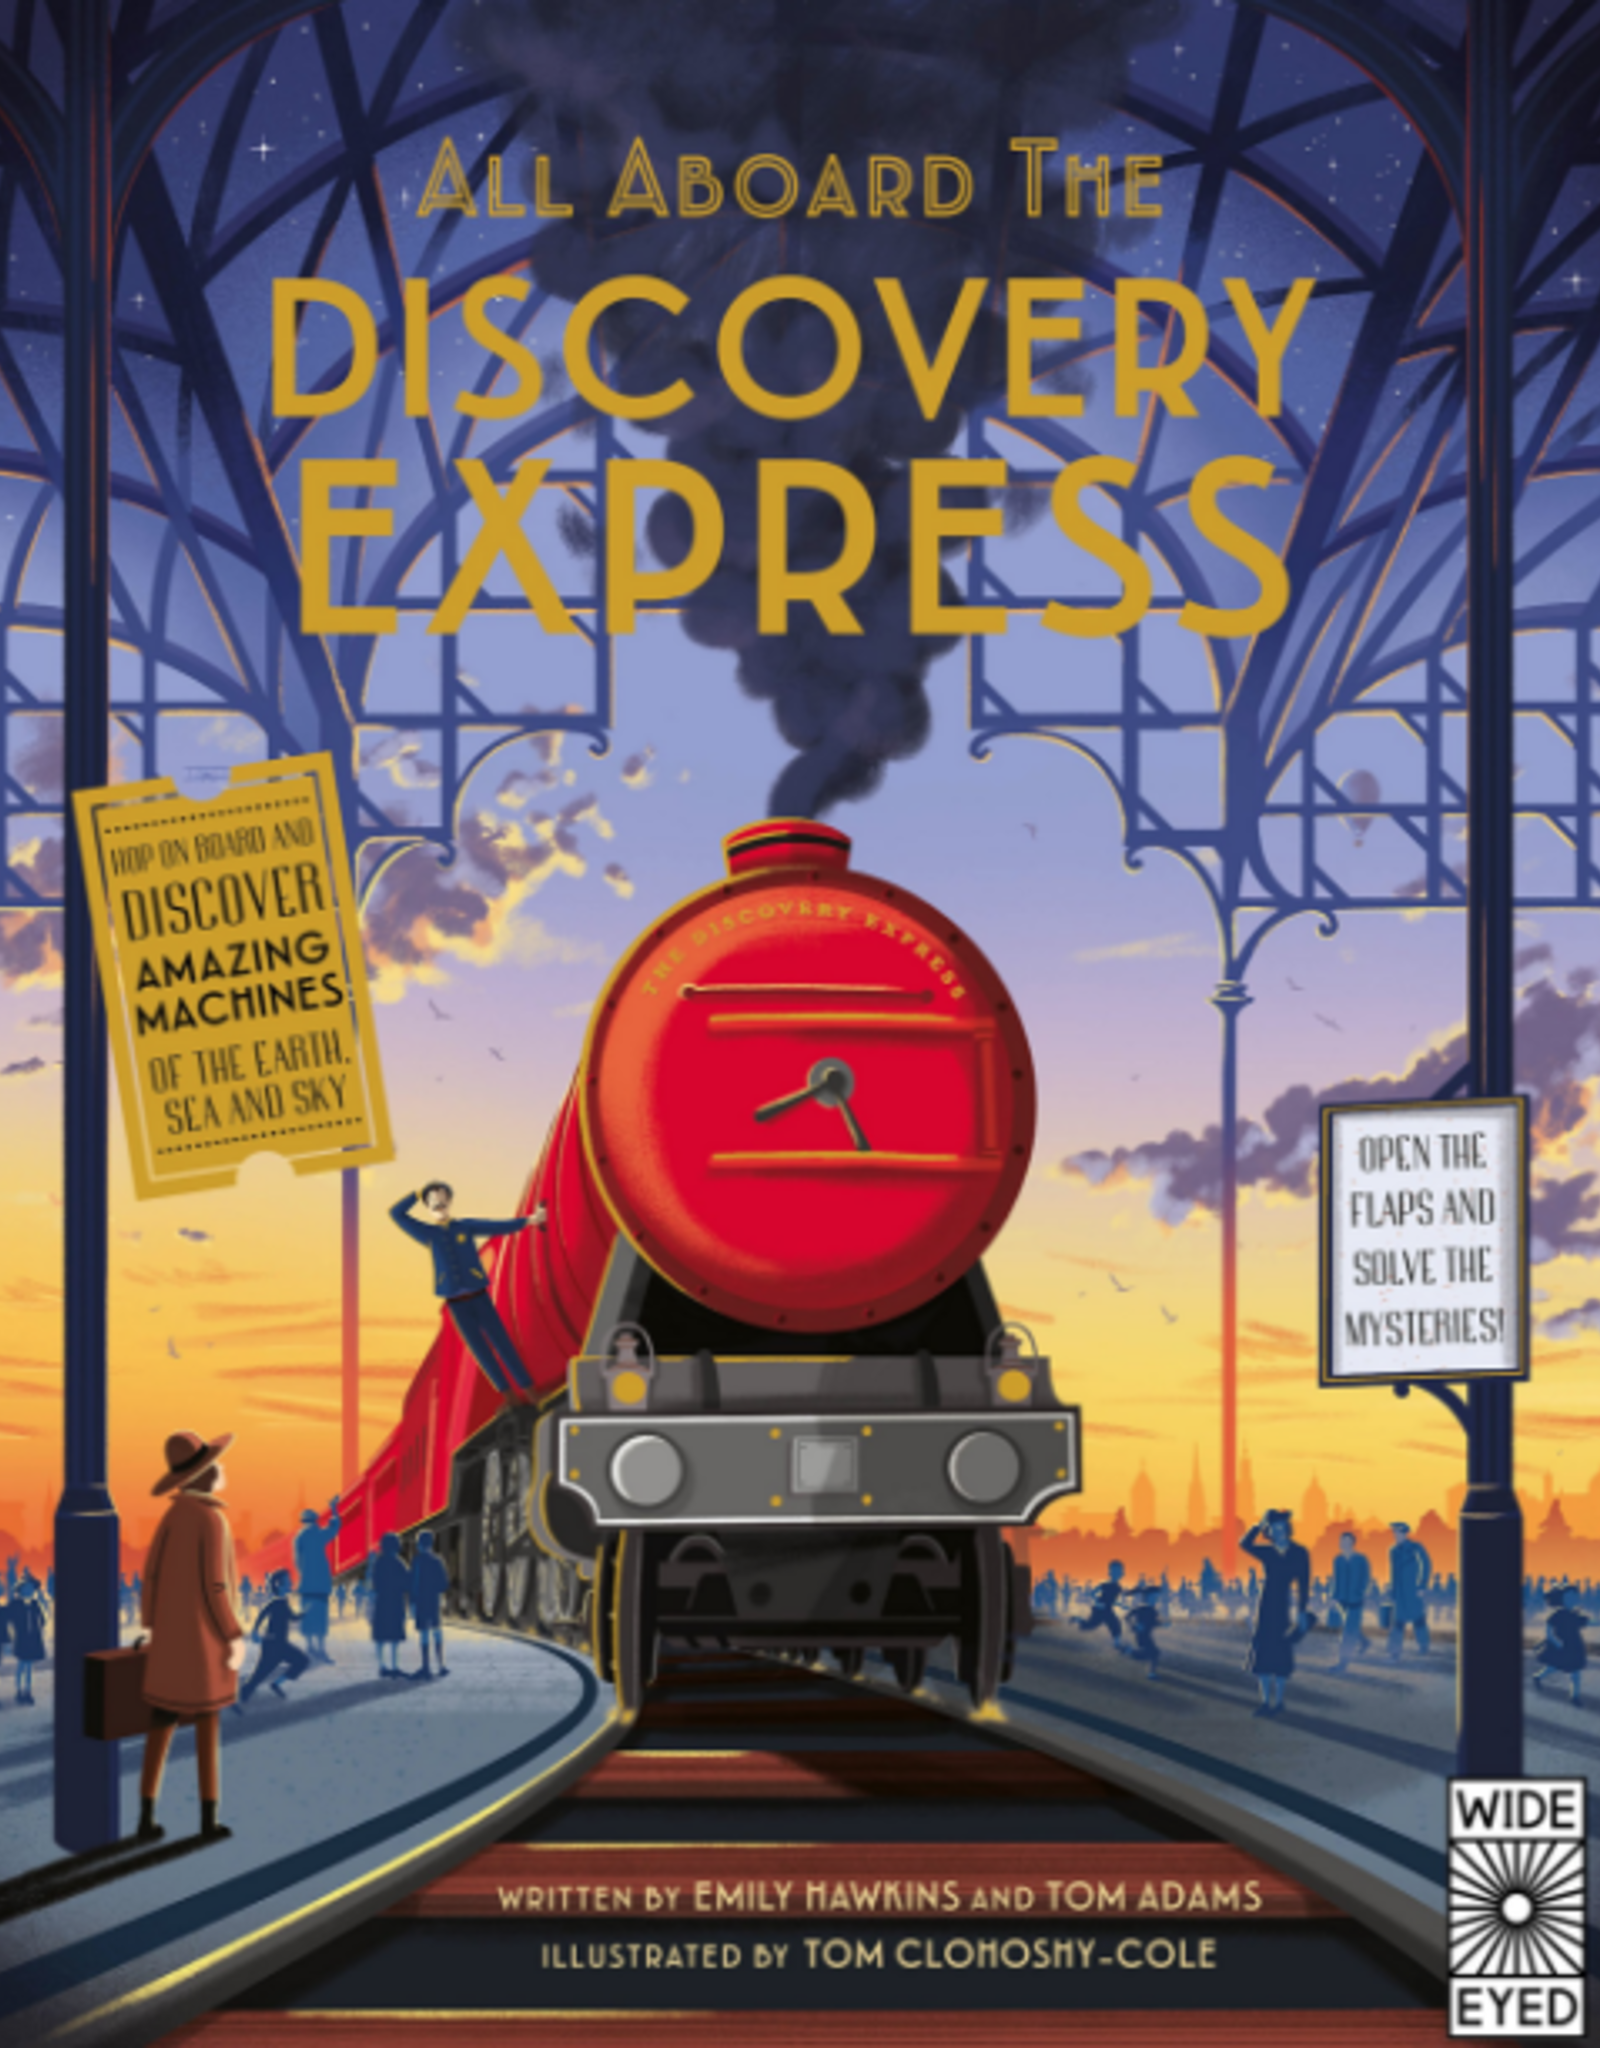 All Aboard the Discovery Express by Emily Hawkins and Tom Adams